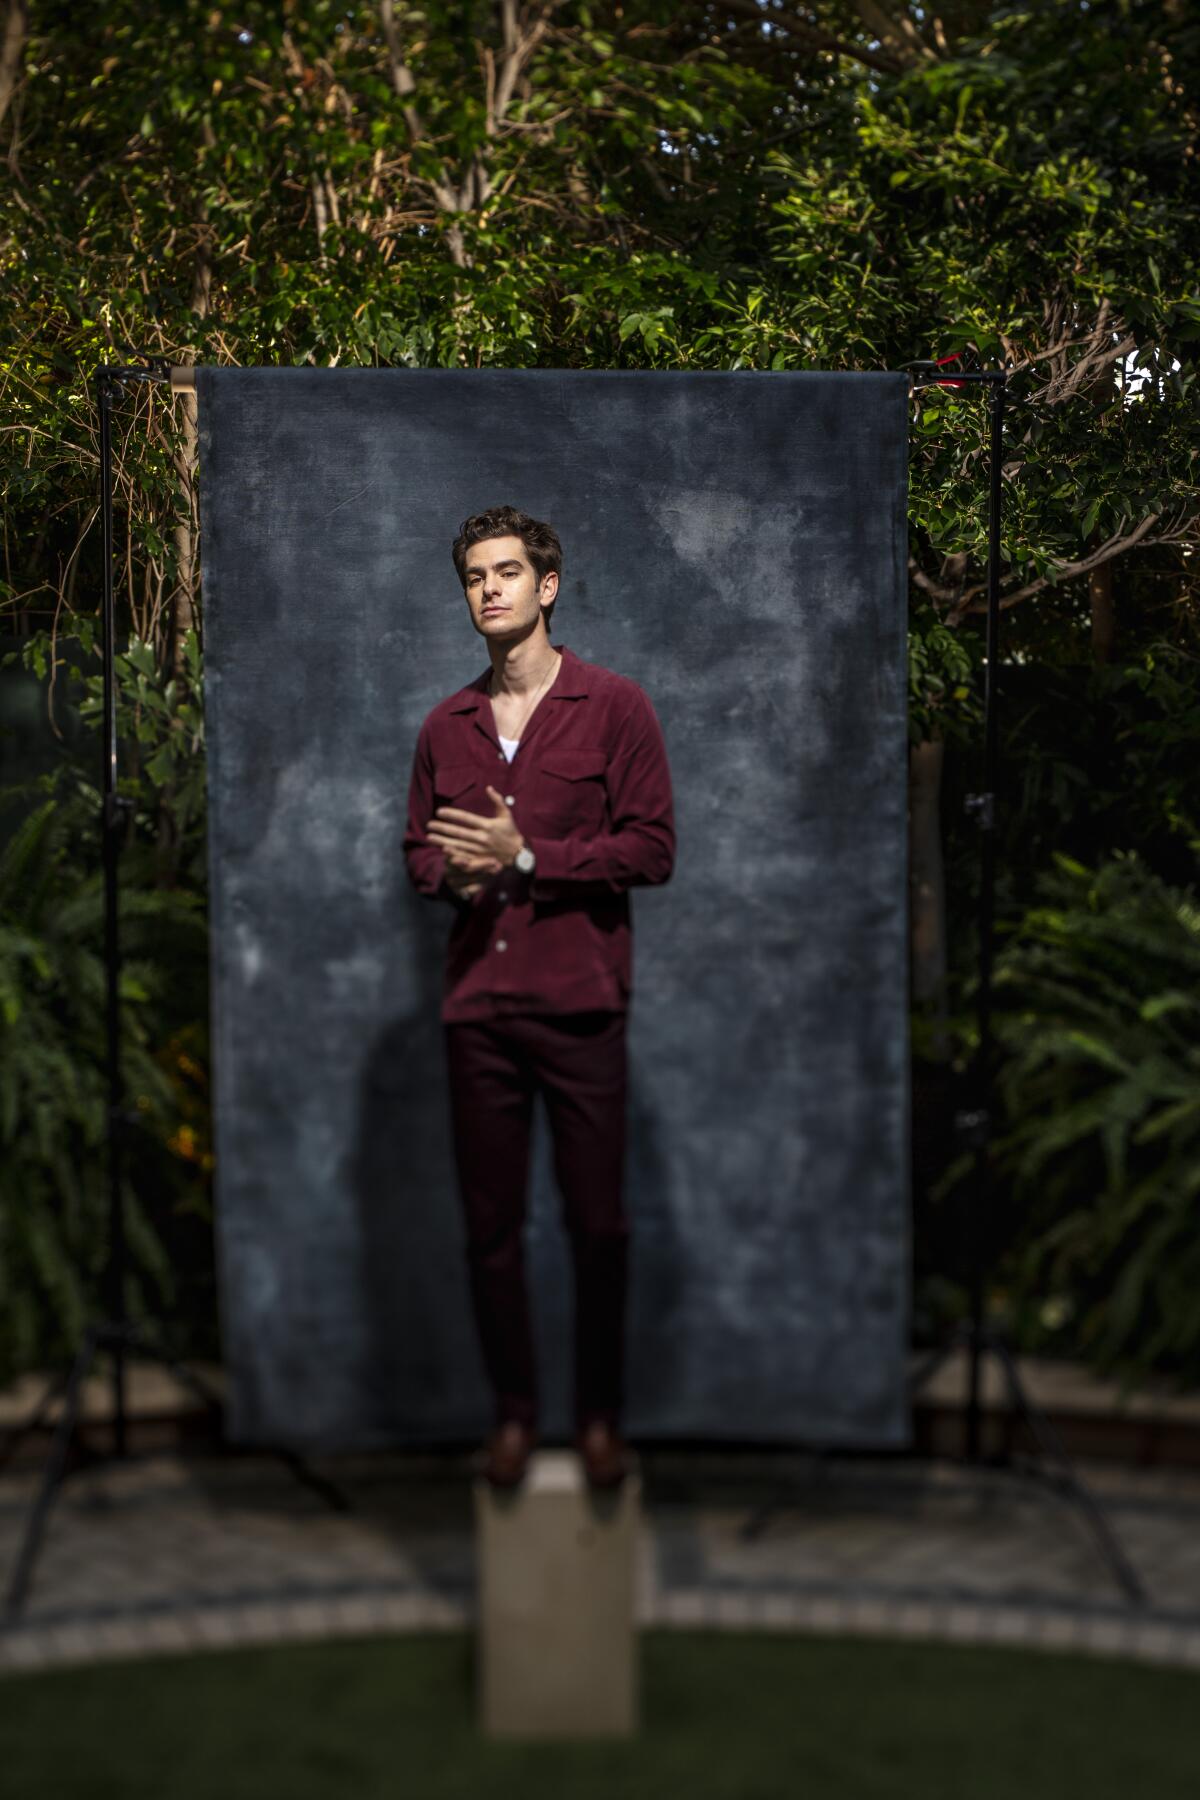 Andrew Garfield poses for a portrait in front of a gray backdrop.